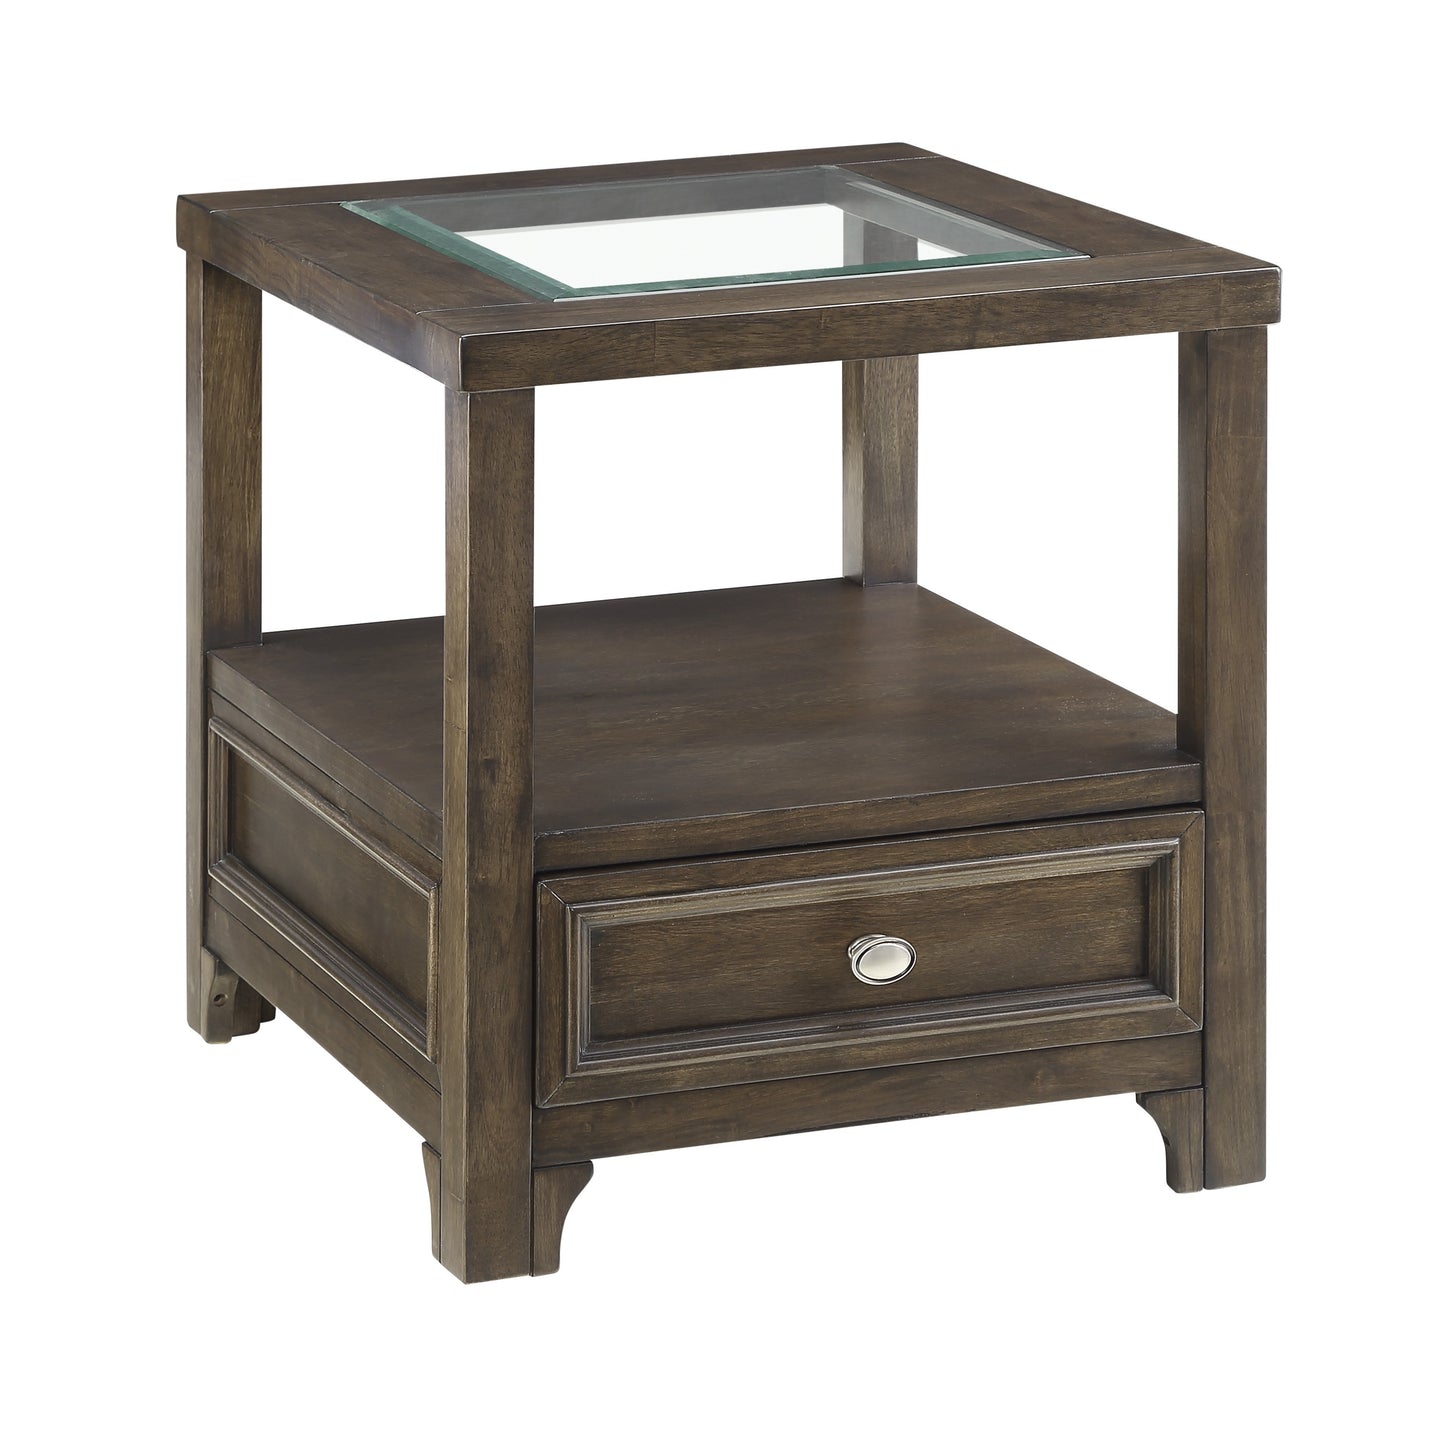 Auburn Coffee Table CHAROAL BROWN ONLY